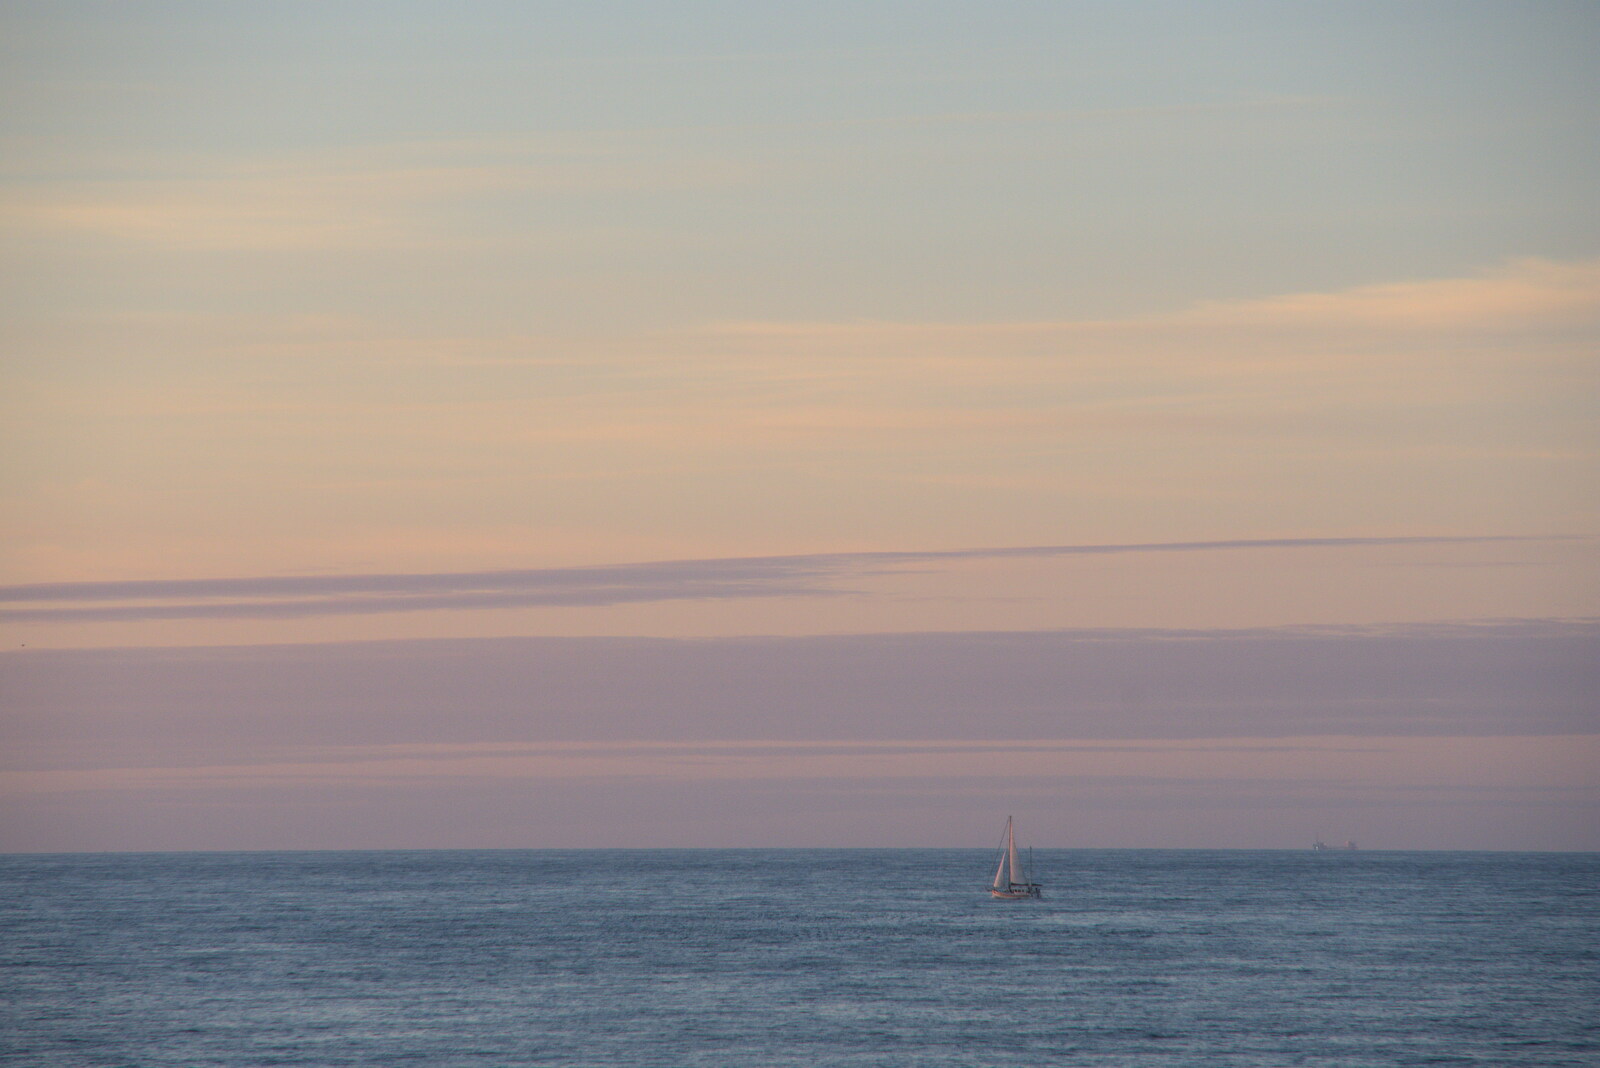 A sailing boat drifts by in the pastel sunset from Camping in the Dunes, Waxham Sands, Norfolk - 9th July 2022